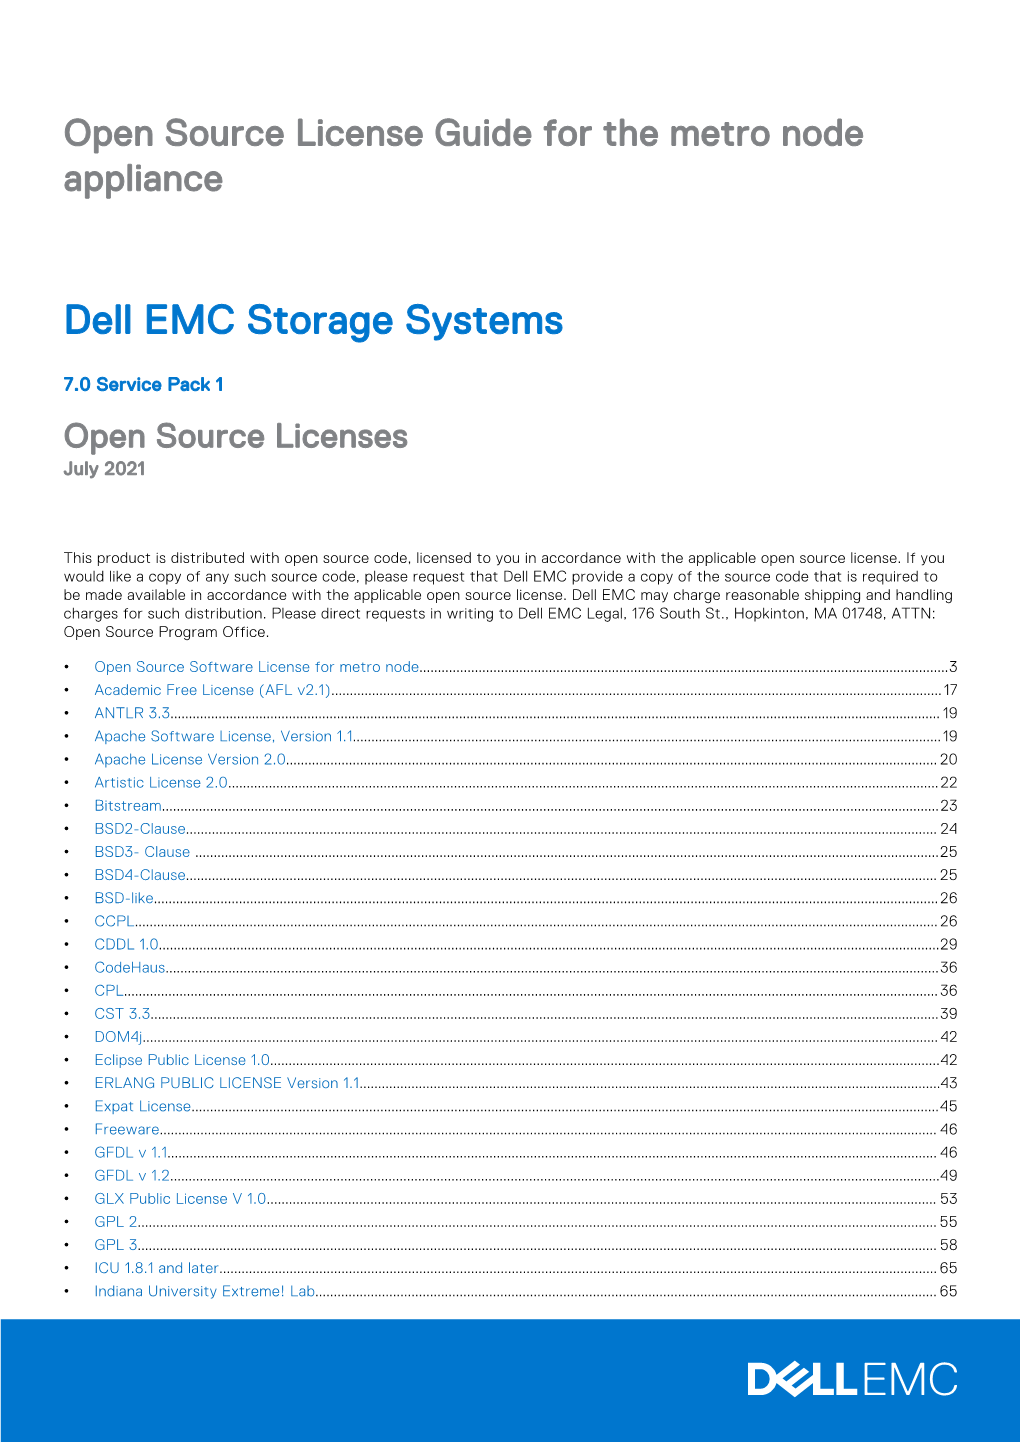 Dell EMC Storage Systems Open Source License Guide for the Metro